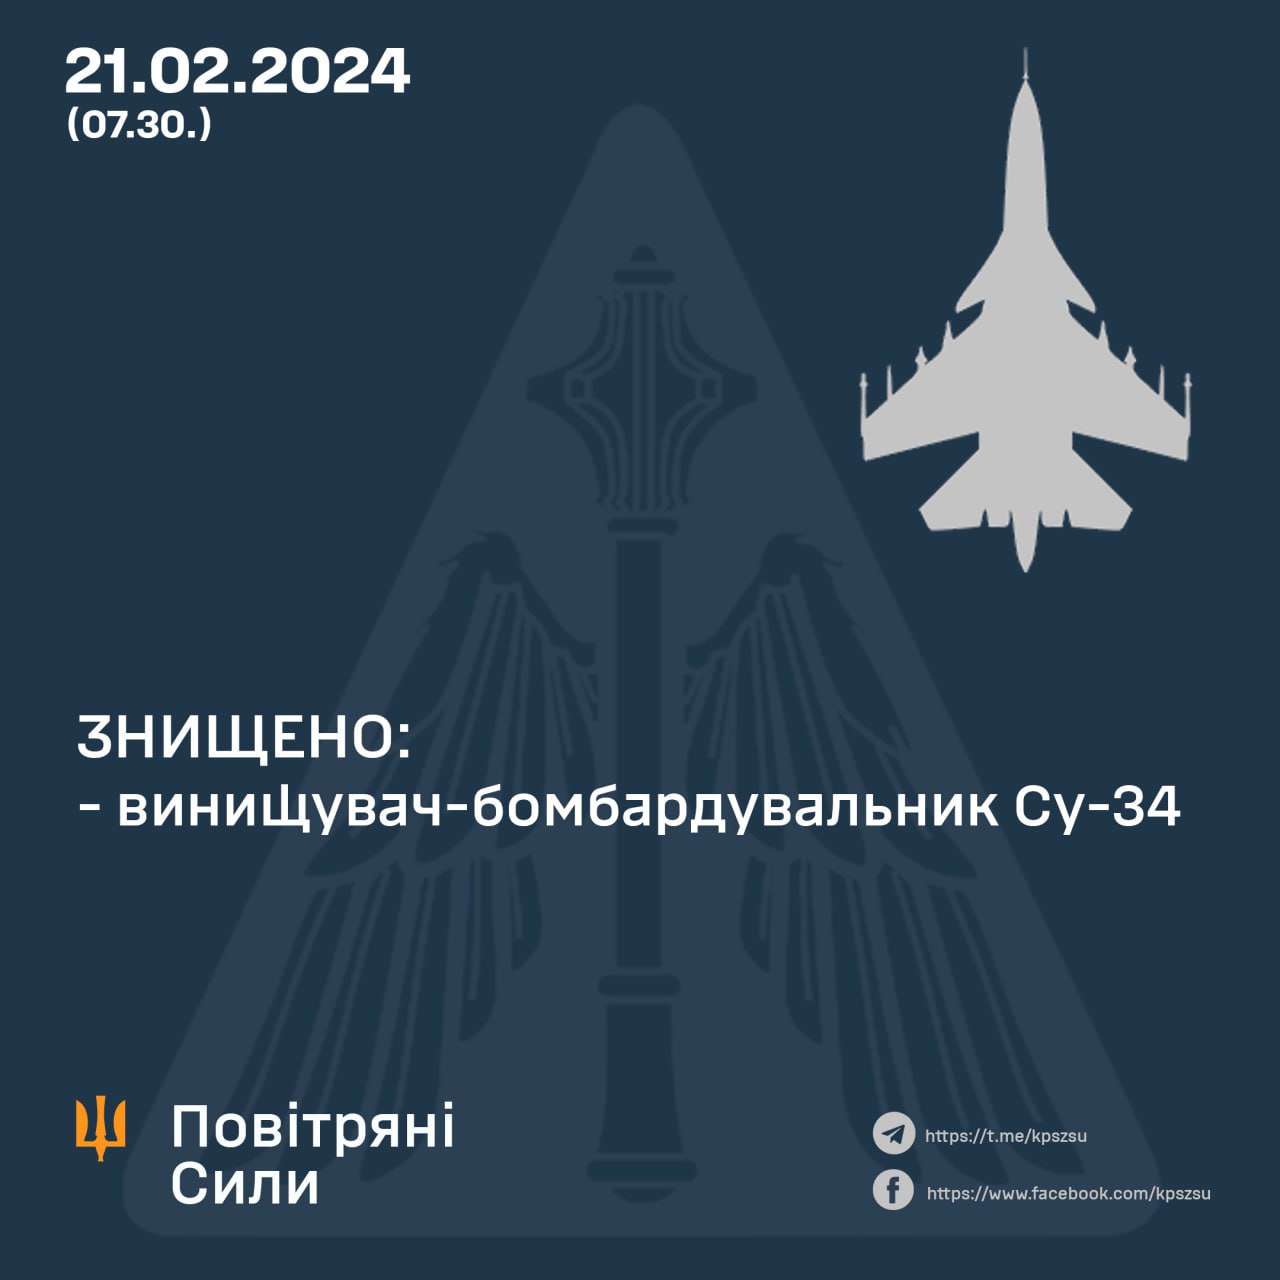 With each downed aircraft, russia’s capabilities in the region suffer significant blow Defense Express Seven Downed russian Aircraft in 5 Days: Ukrainian Forces Destroy Another Su-34 Bomber